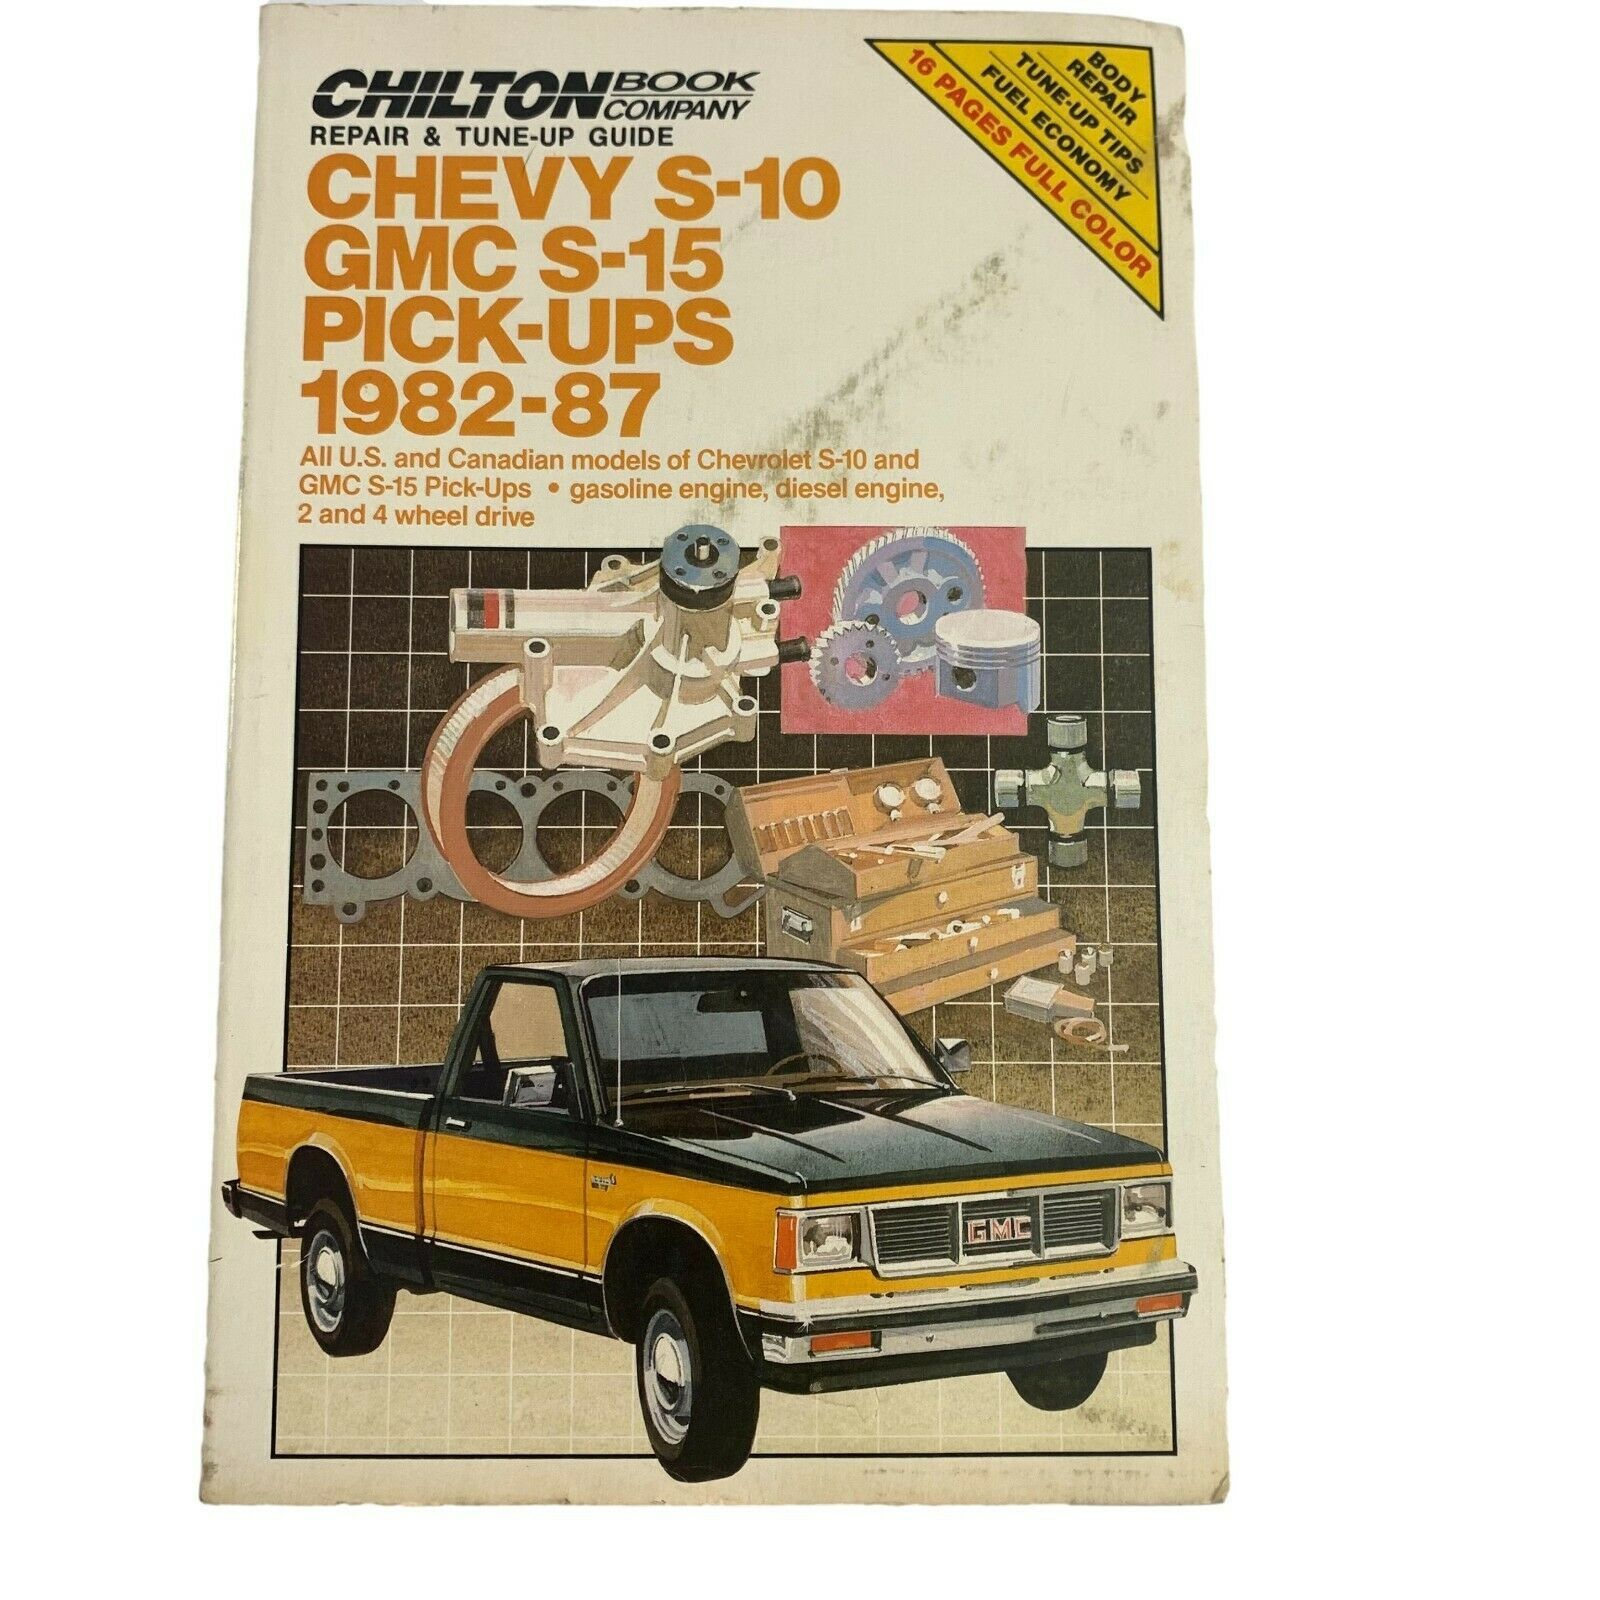 Primary image for Chilton Repair Tune Up Guide Book Manual Chevy S10 GMC S15 Pick Ups 1982-1987